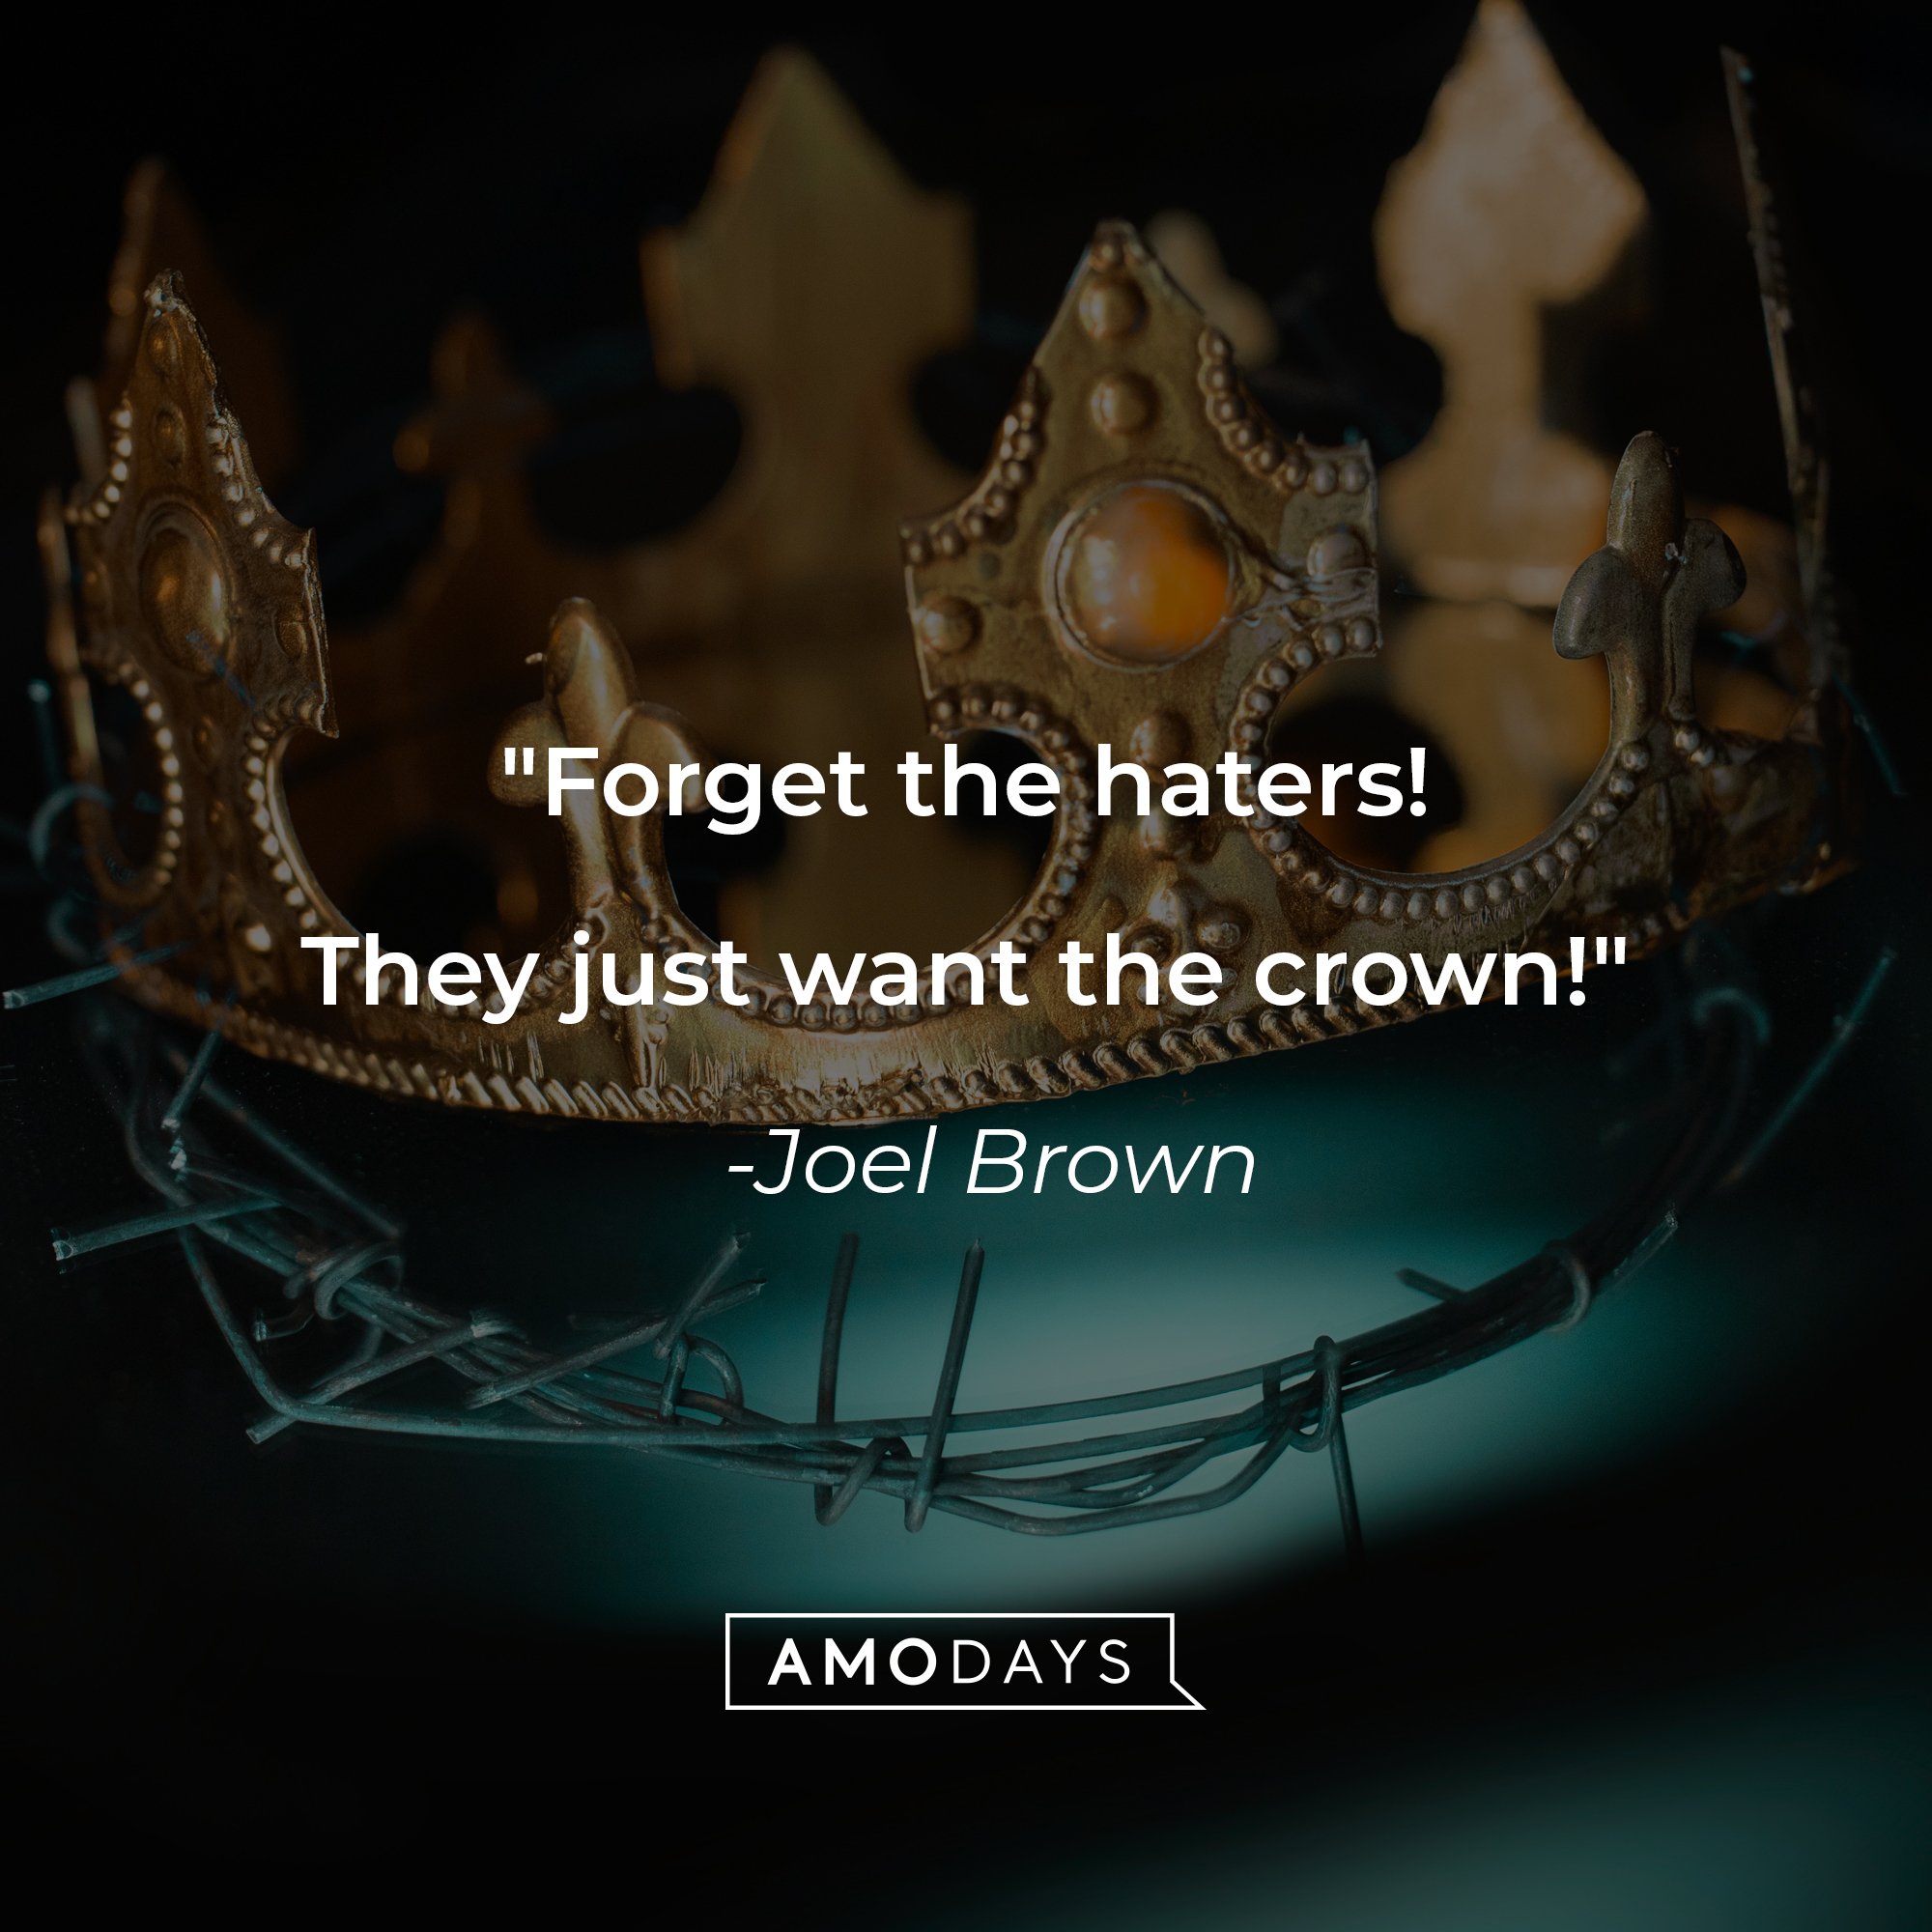 Joel Brown's quote: "Forget the haters! They just want the crown!" | Image: AmoDays